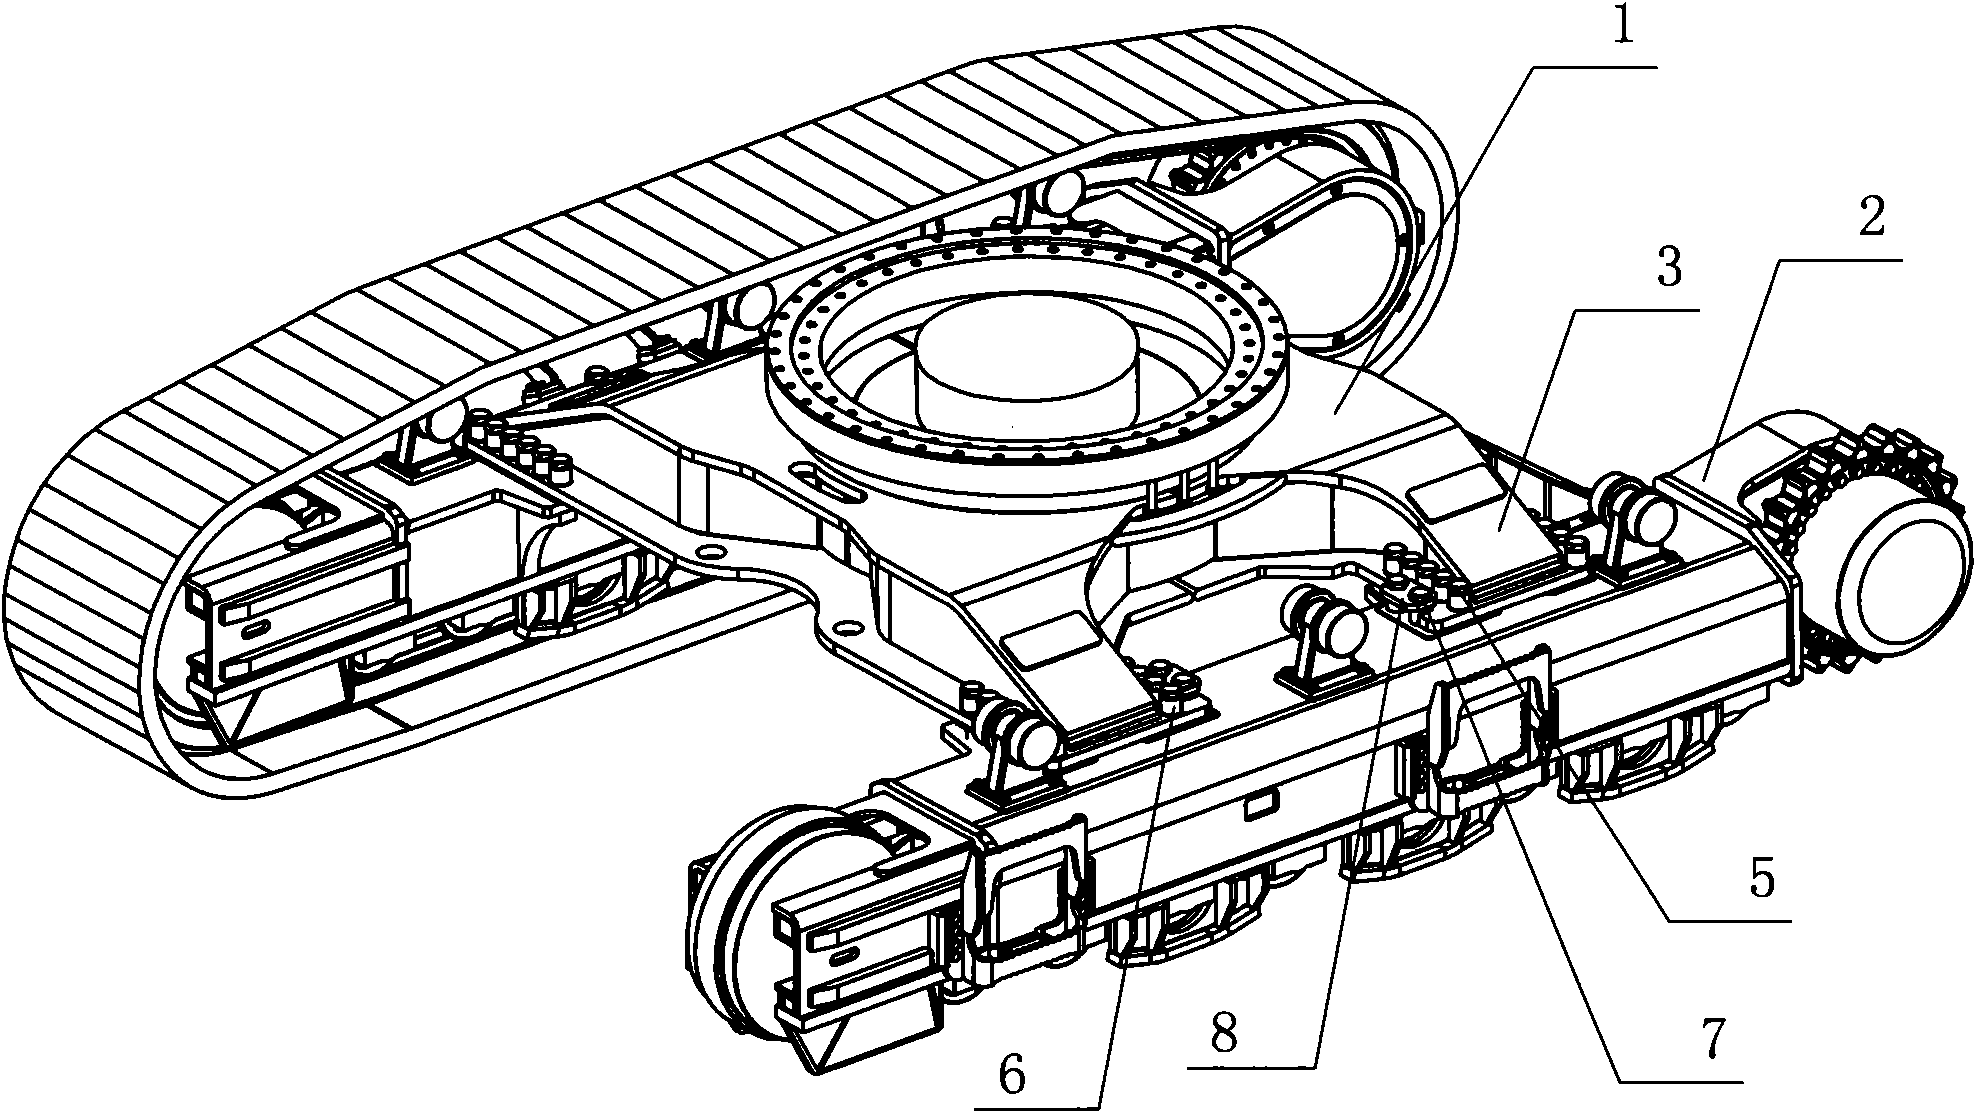 Telescopic chassis structure used for excavator